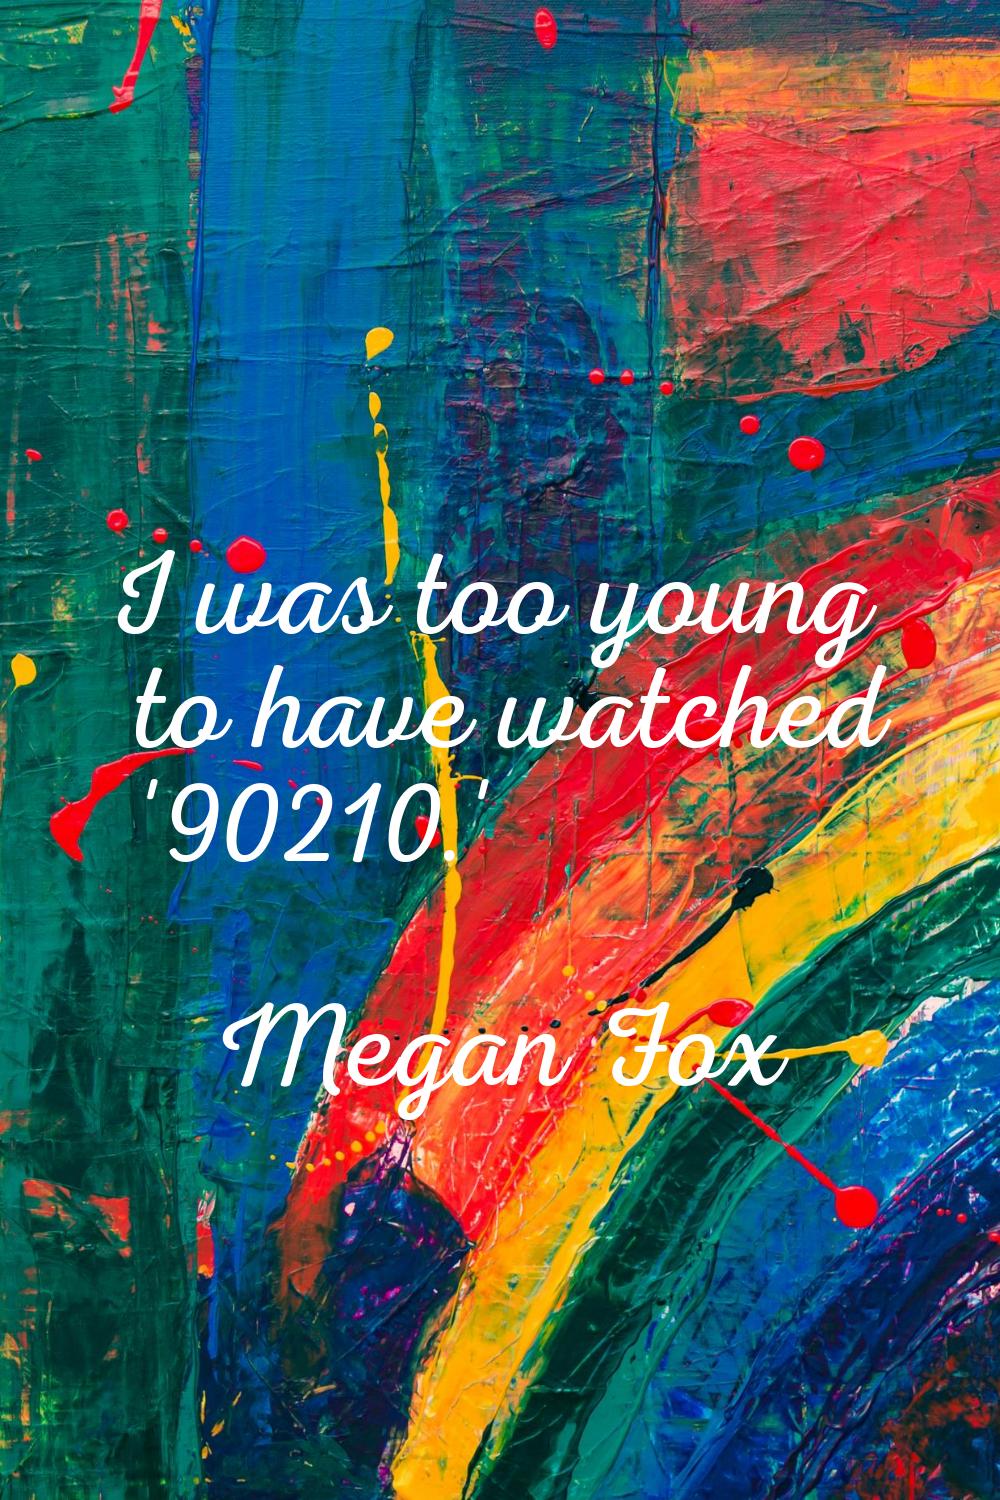 I was too young to have watched '90210.'